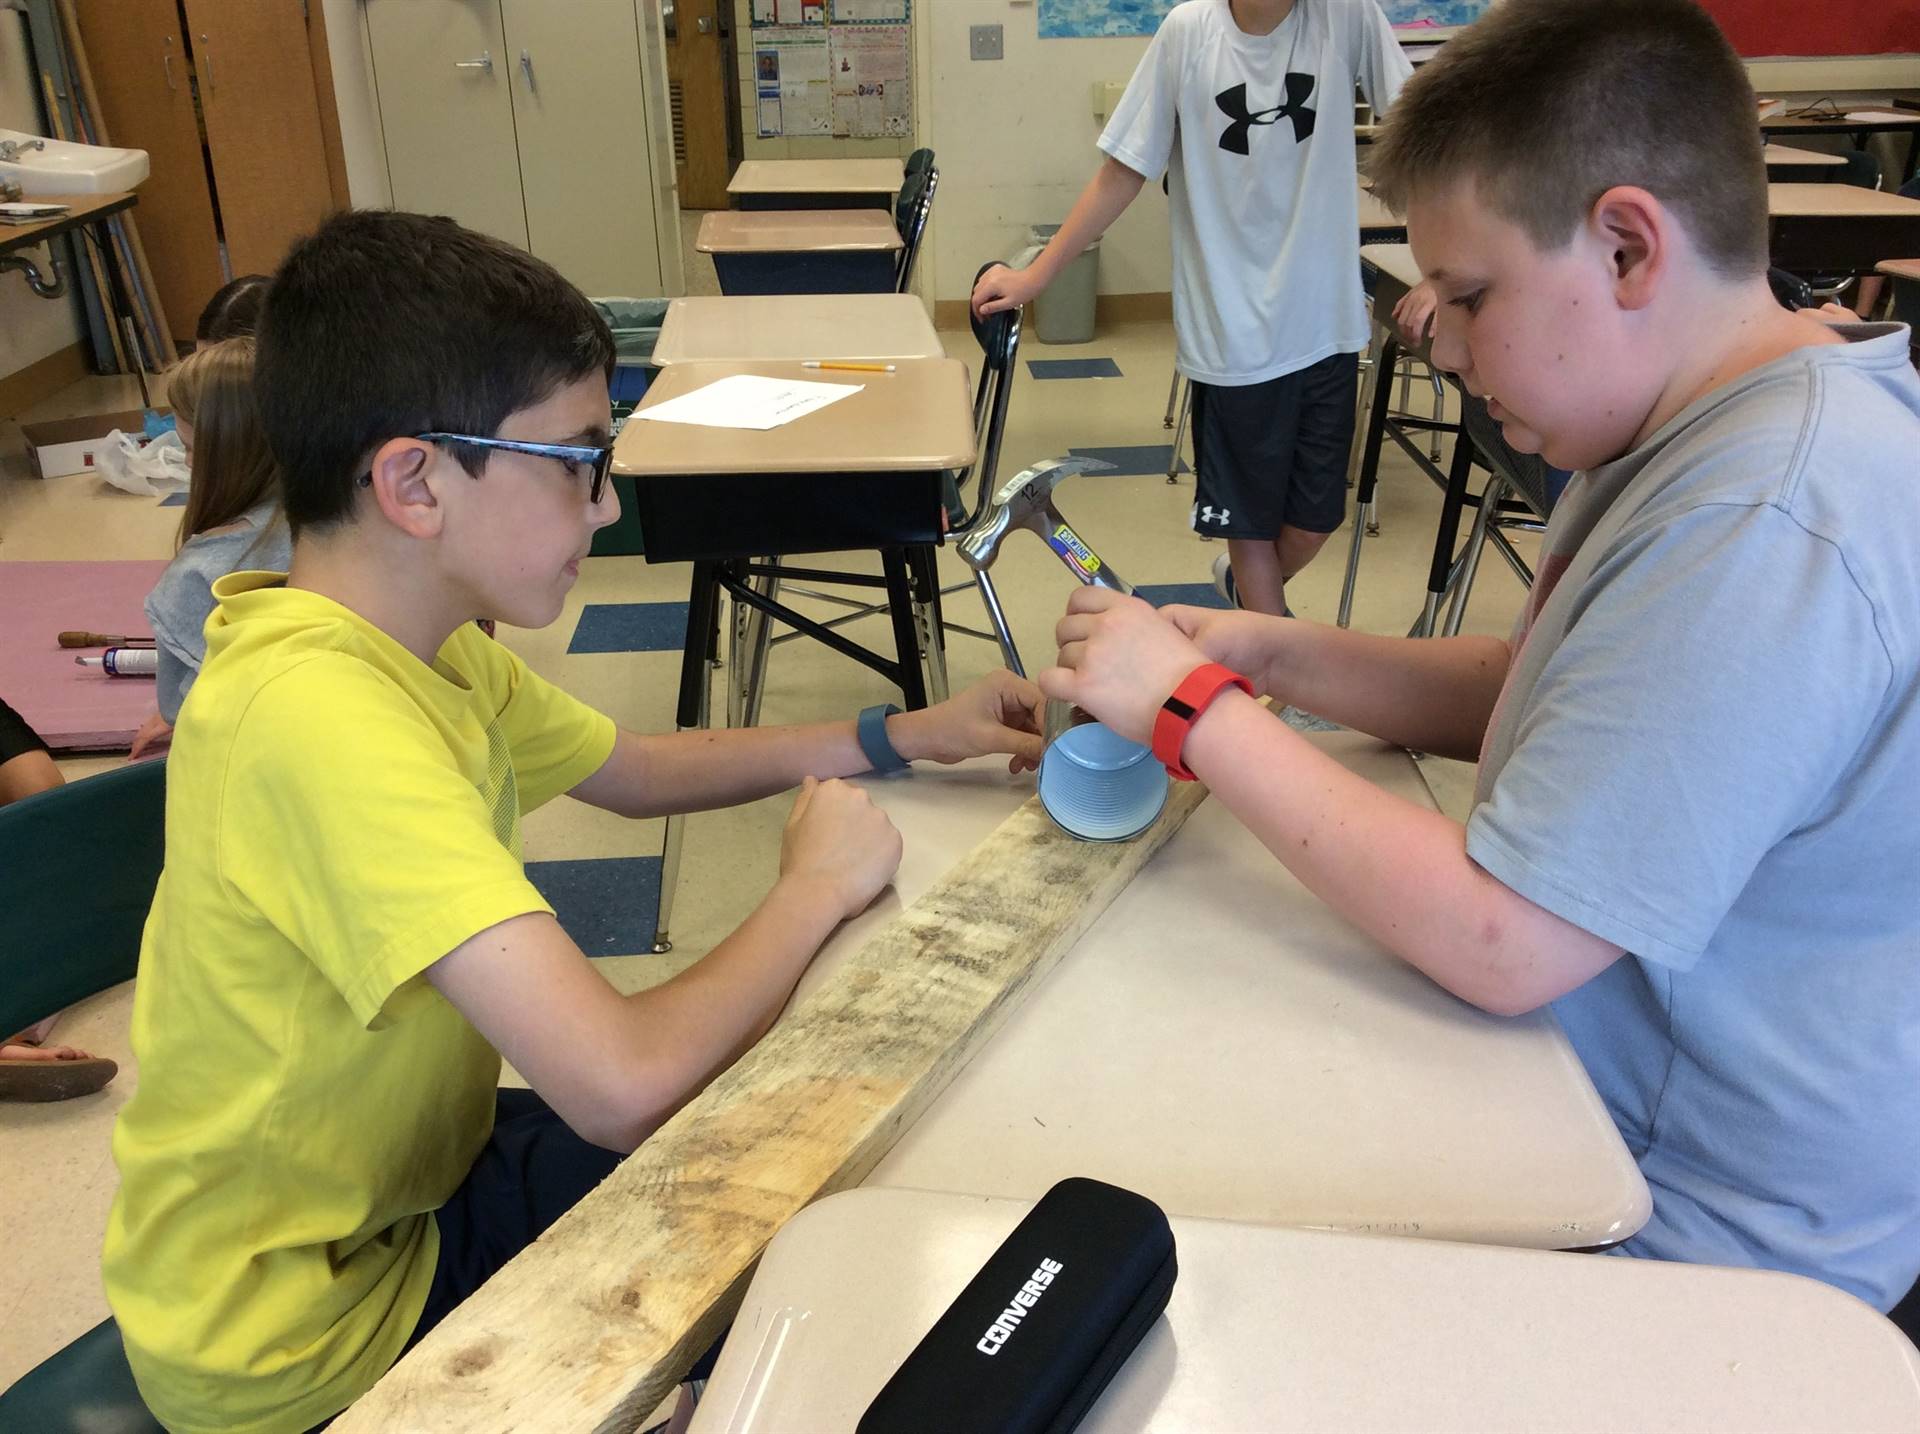 two boys working together to attach items to a board